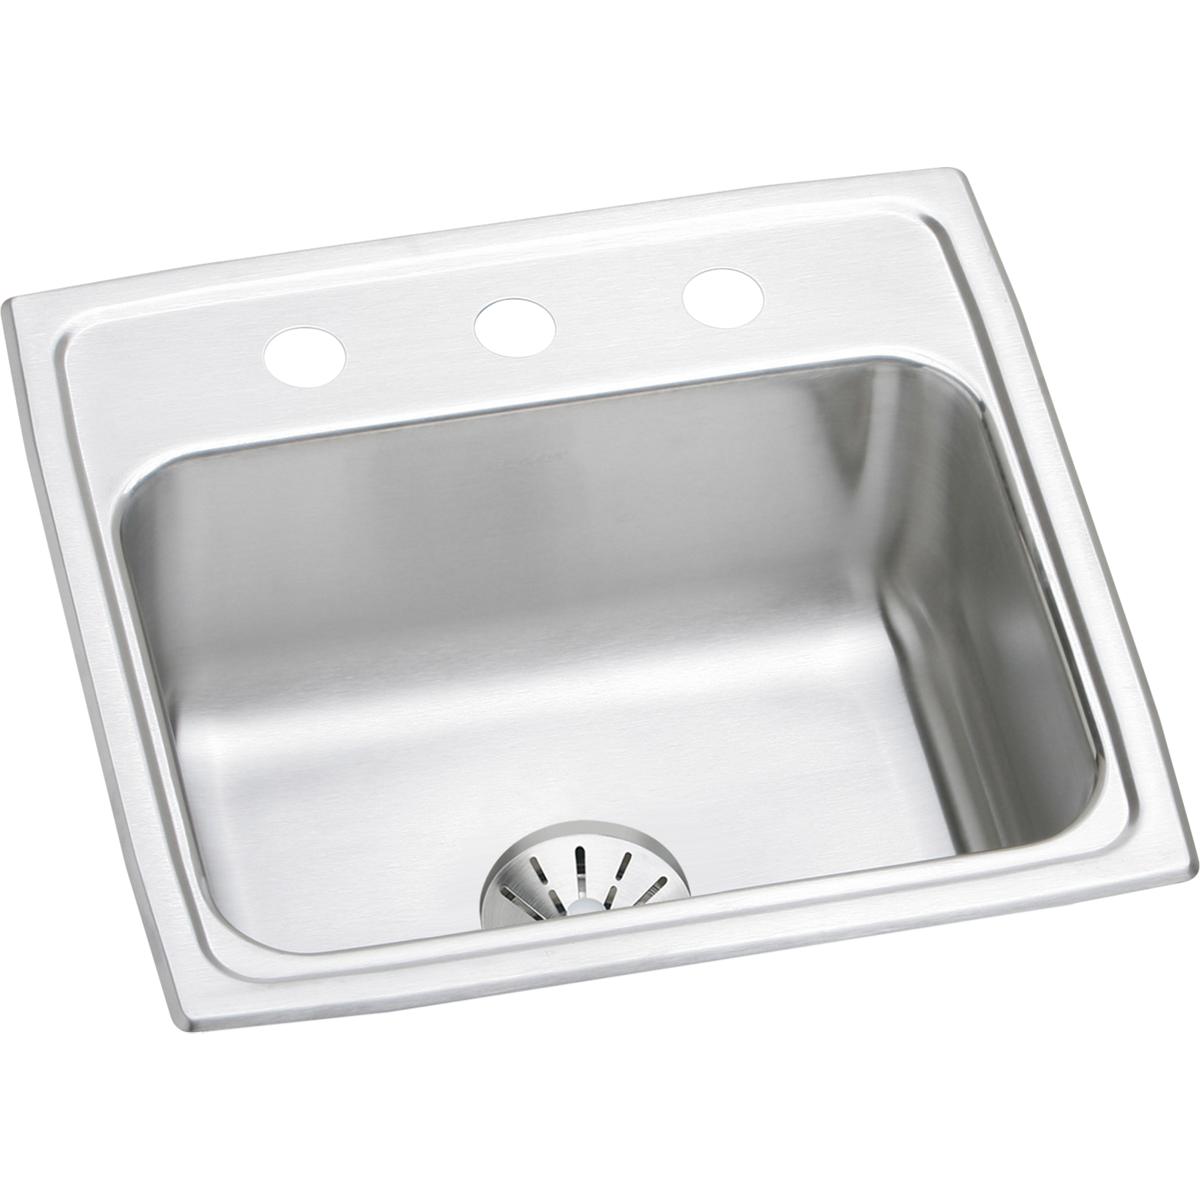 Elkay Lustertone Classic 19-1/2" x 19" x 7-1/2" Stainless Steel Single Bowl Drop-in Sink with Perfect Drain